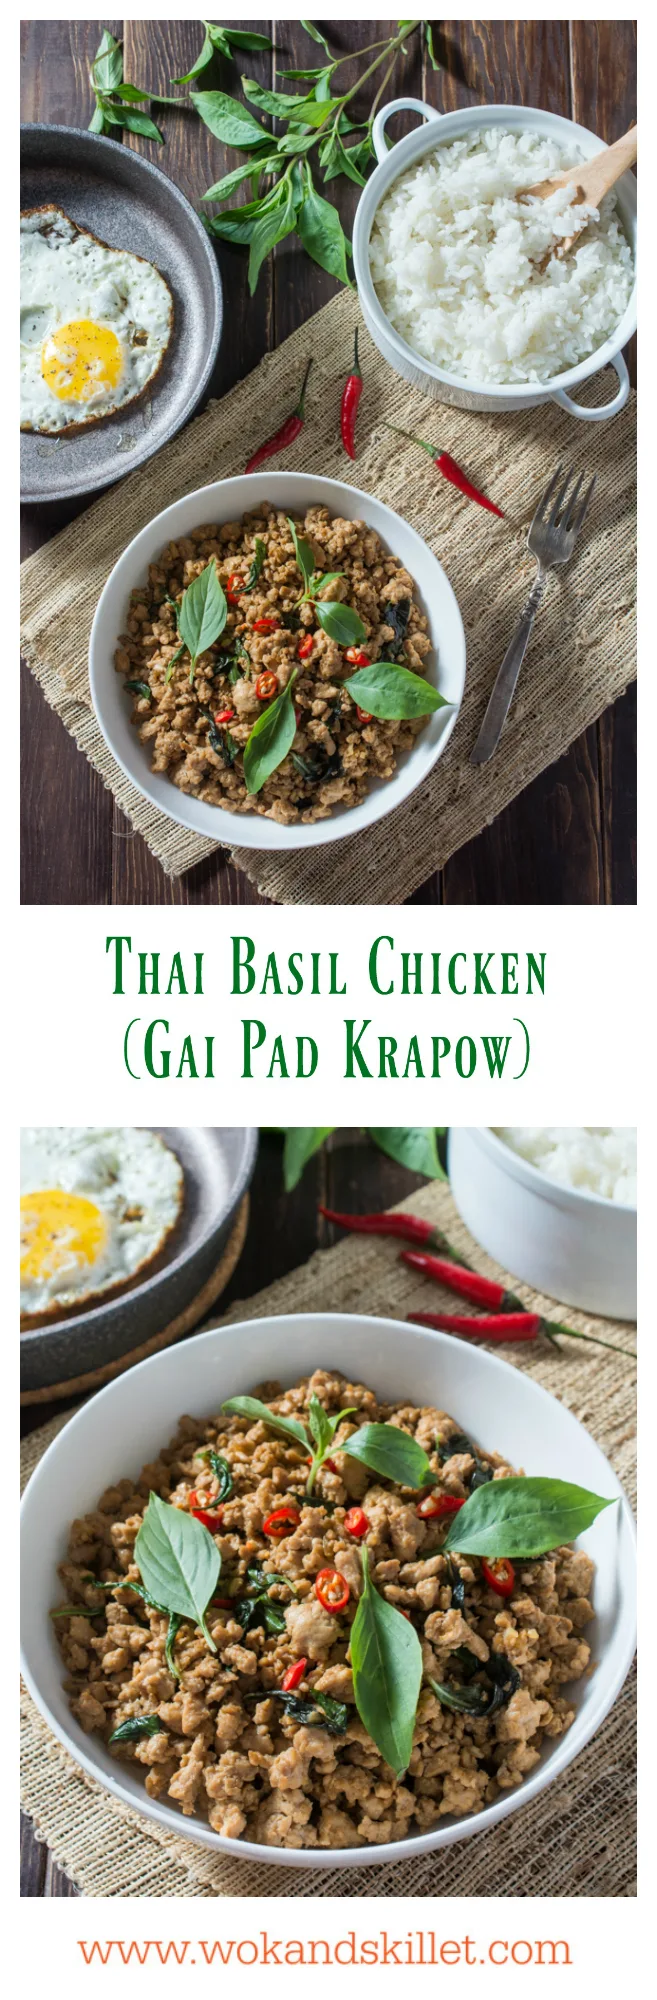  Thai Basil Chicken (Gai Pad Krapow) is a classic Thai stir-fry where the amazing aroma of basil pairs so well with the savory sauce. Serve over steamed jasmine rice and top with a fried egg for the ultimate Thai comfort food.